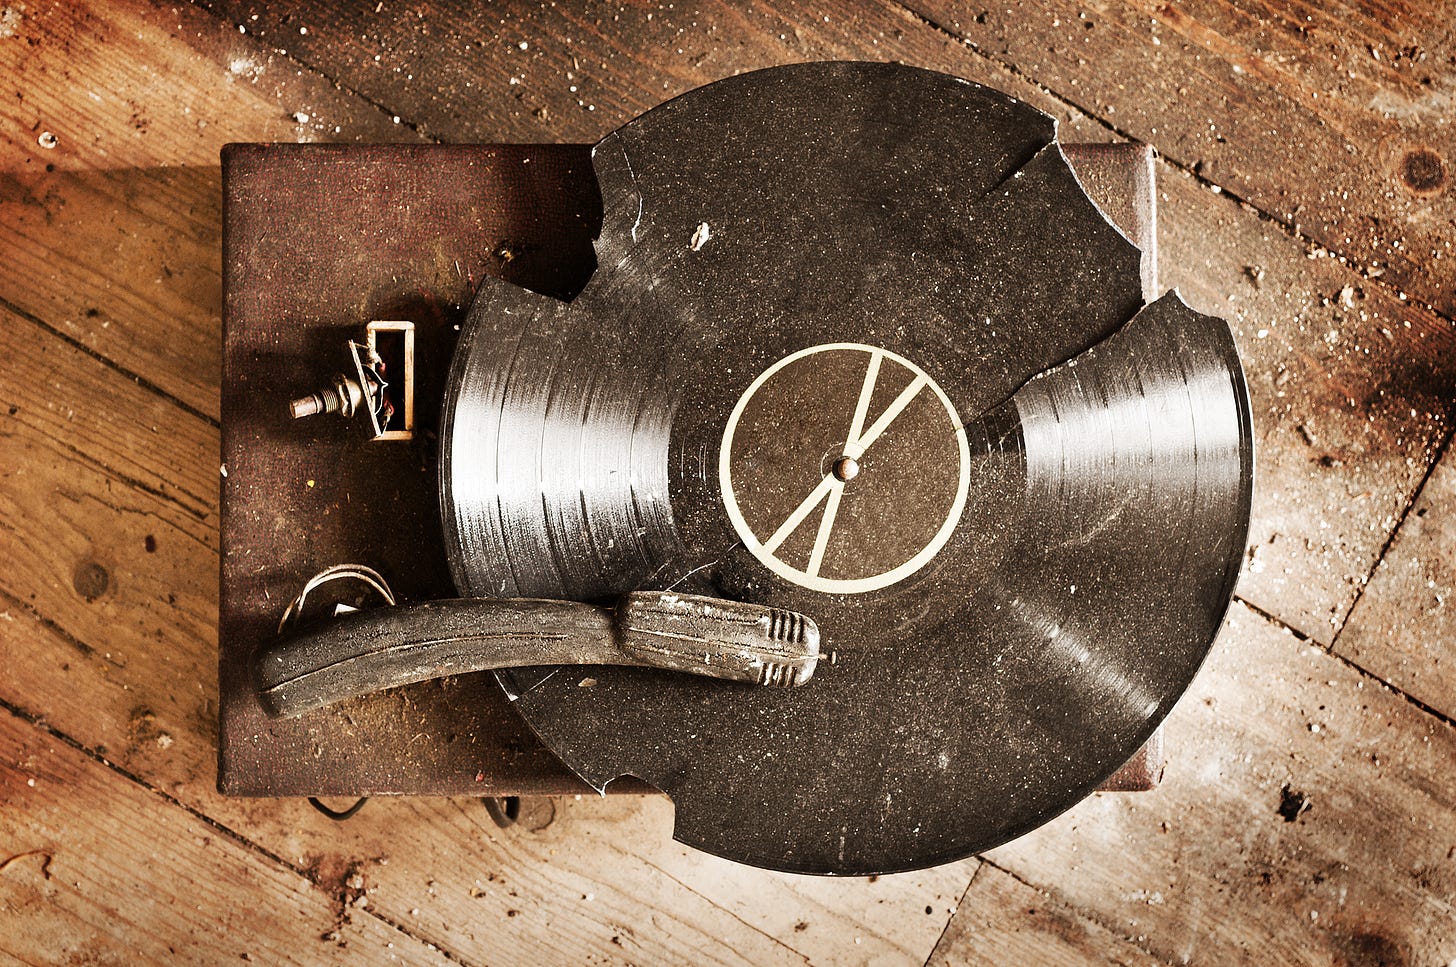 The image of a wooden record player on a wood-slatted floor, playing a dusty, broken record.